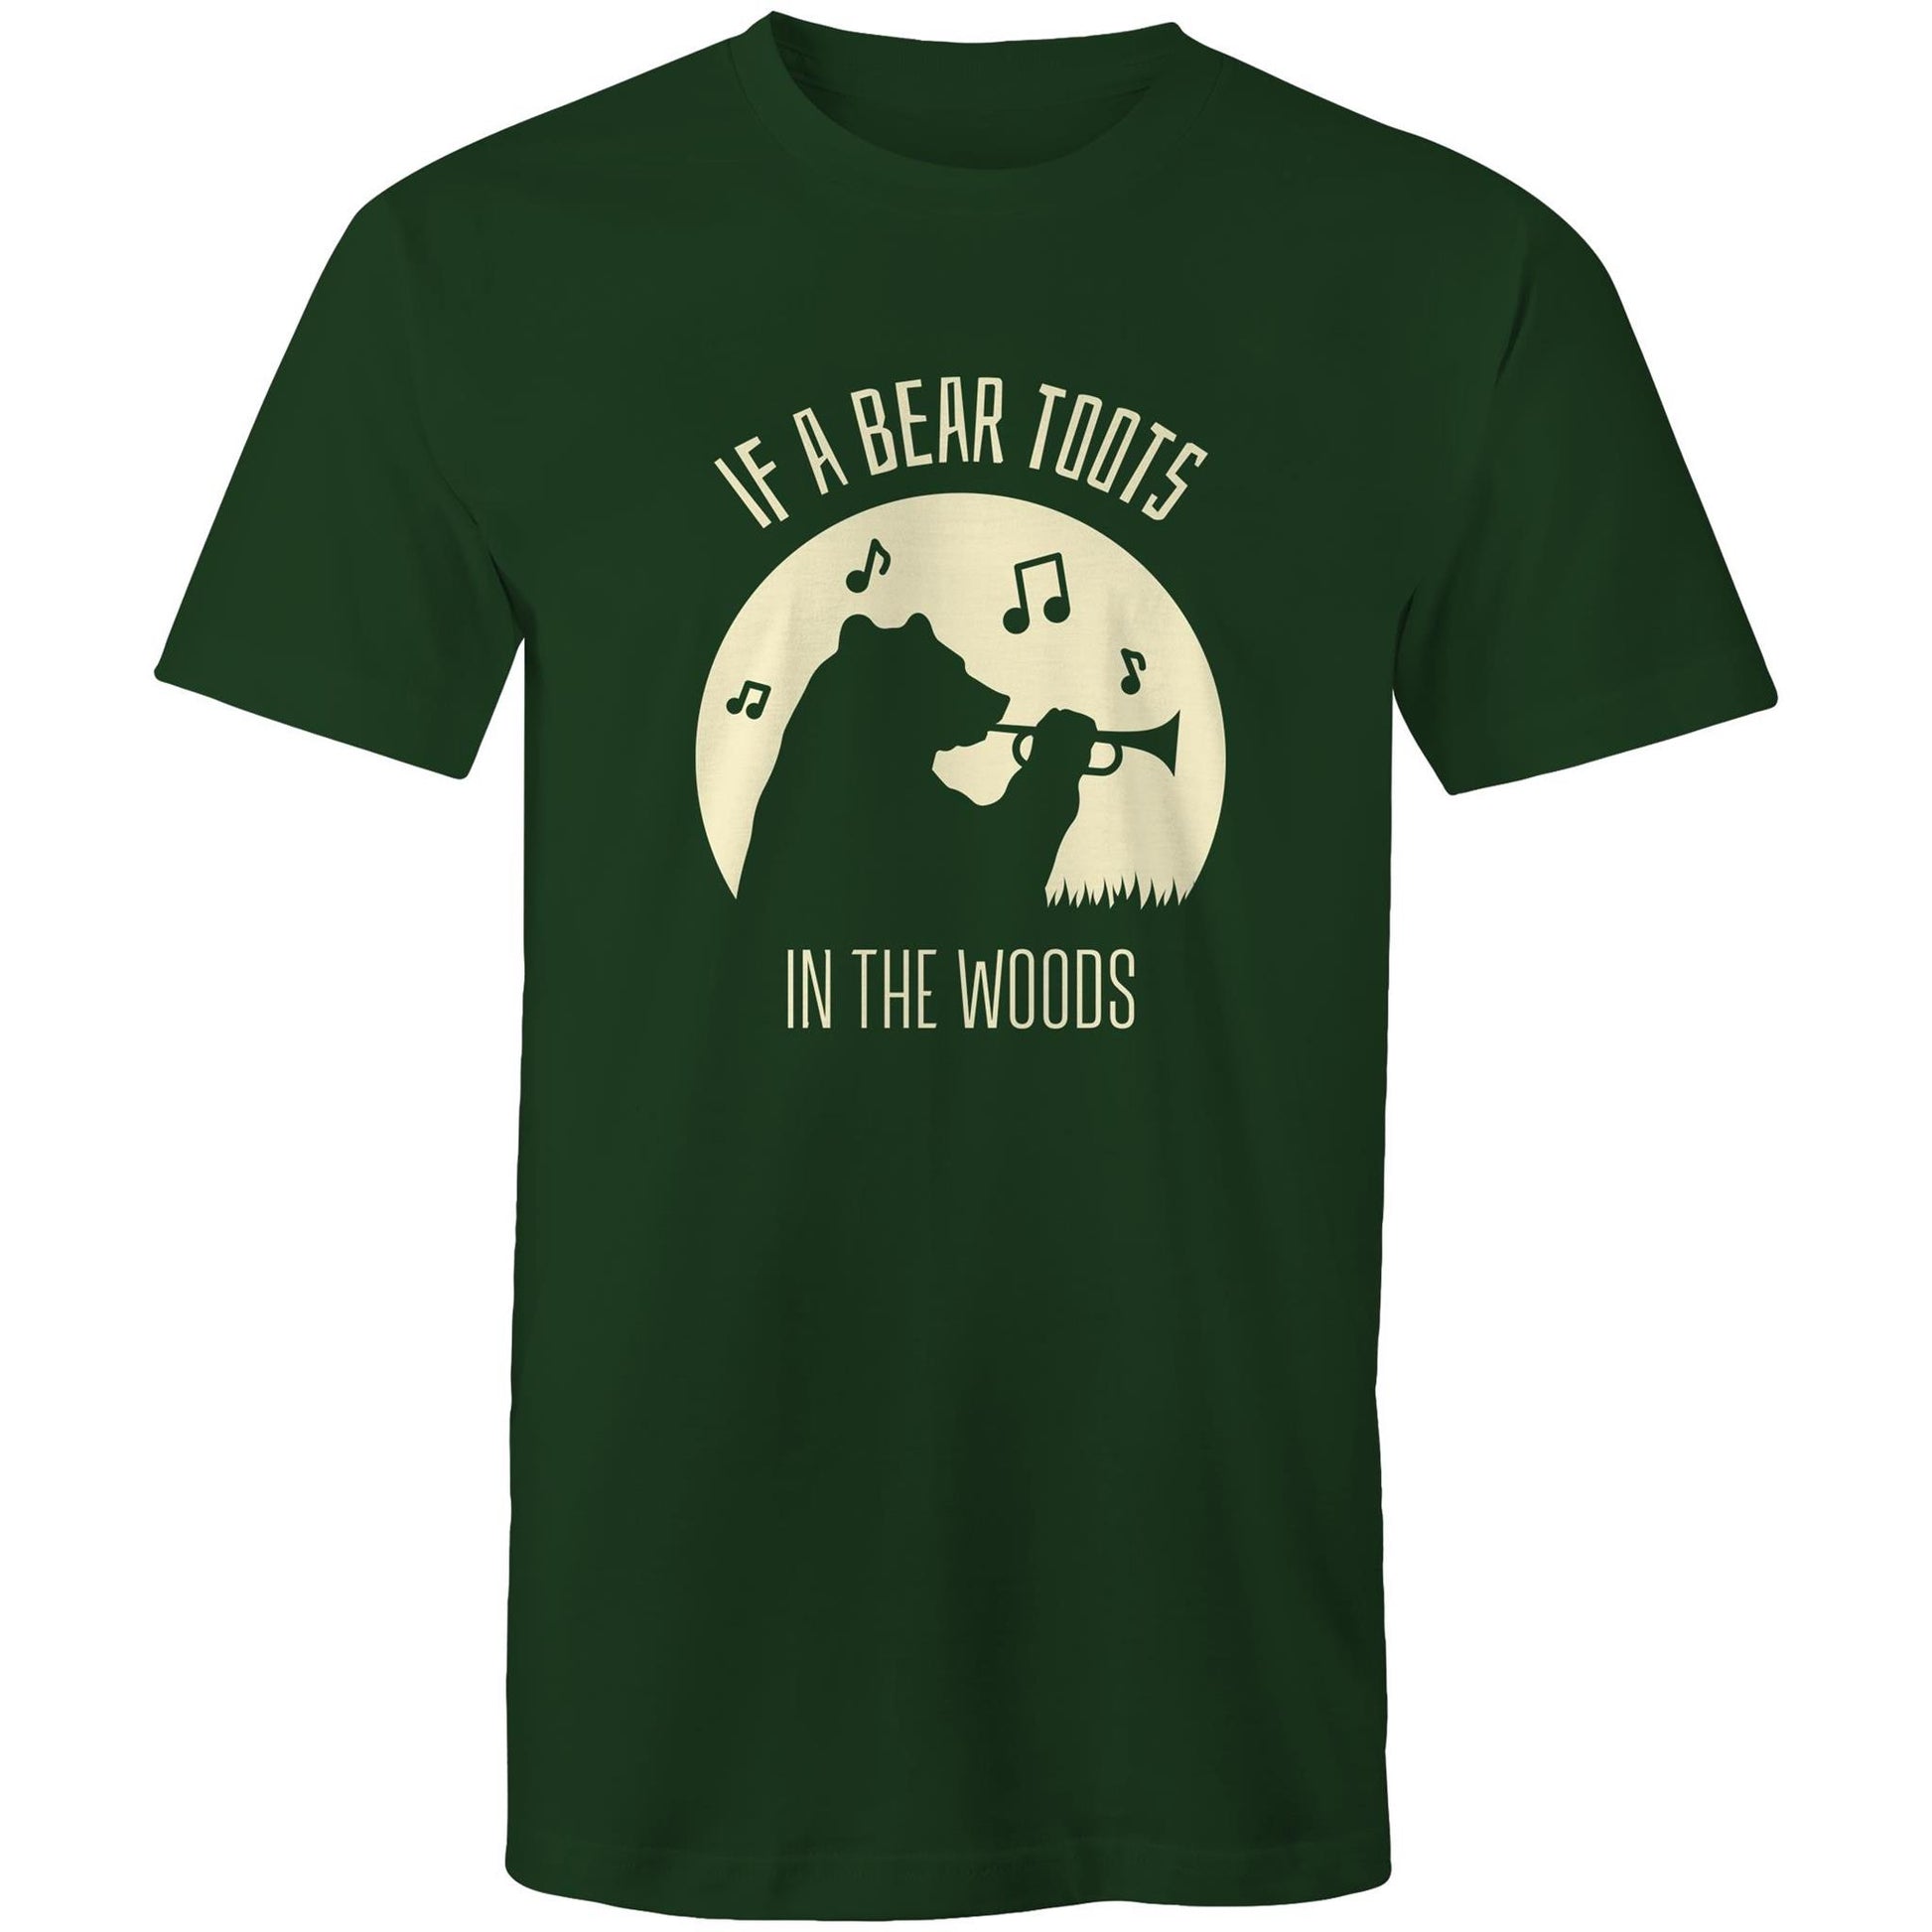 If A Bear Toots In The Woods, Trumpet Player - Mens T-Shirt Forest Green Mens T-shirt animal Music